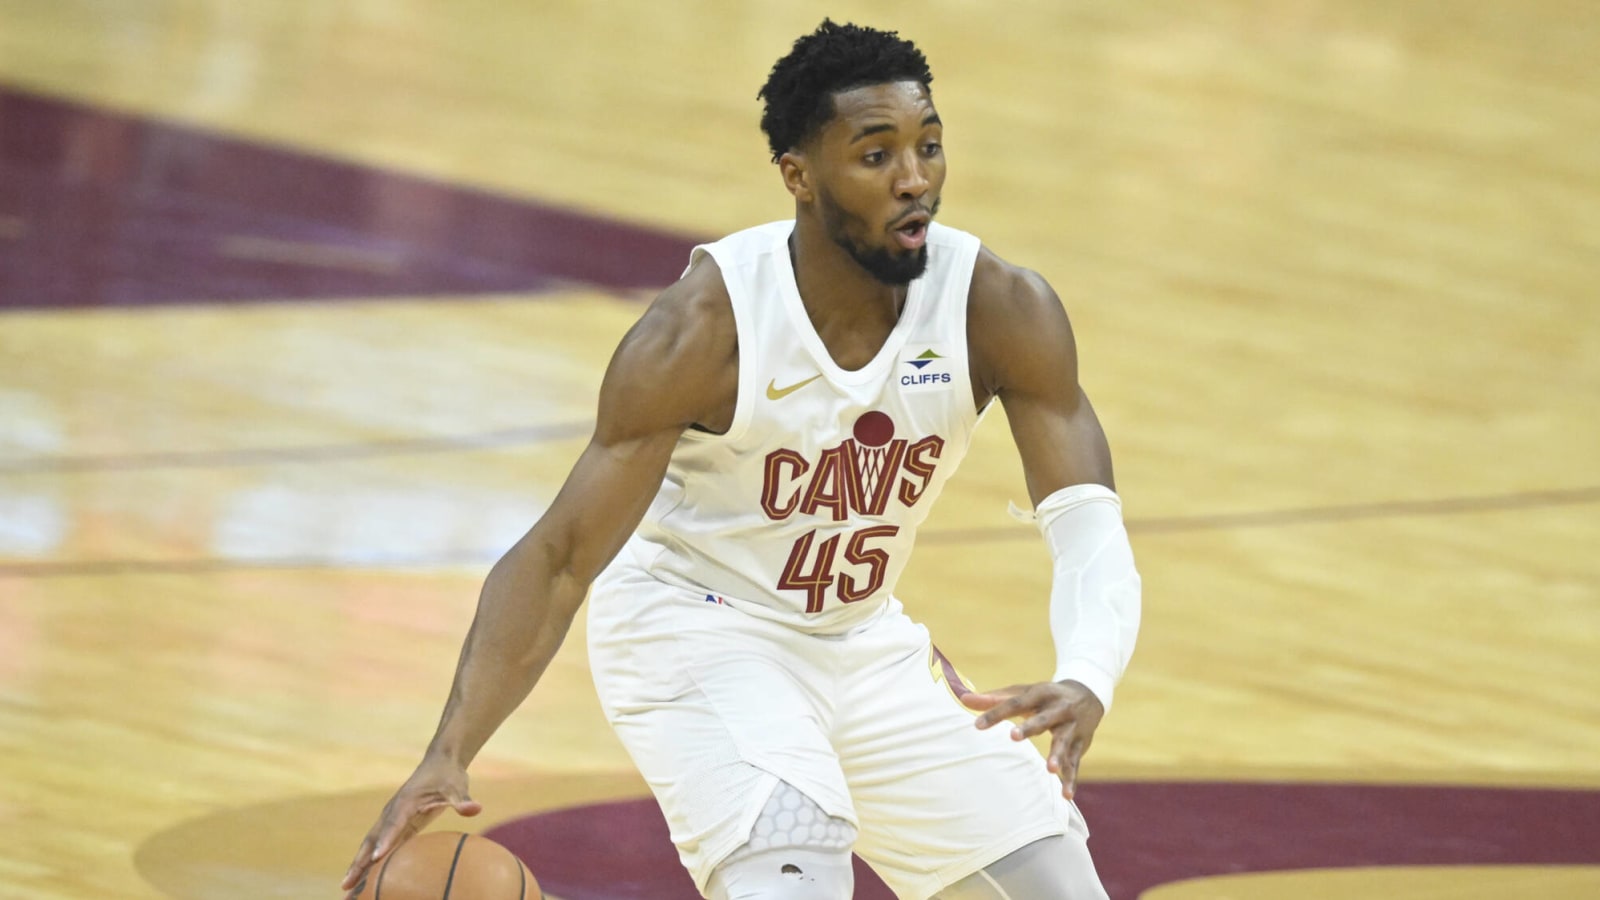 Report: Cavs not looking to move Donovan Mitchell or shake up roster